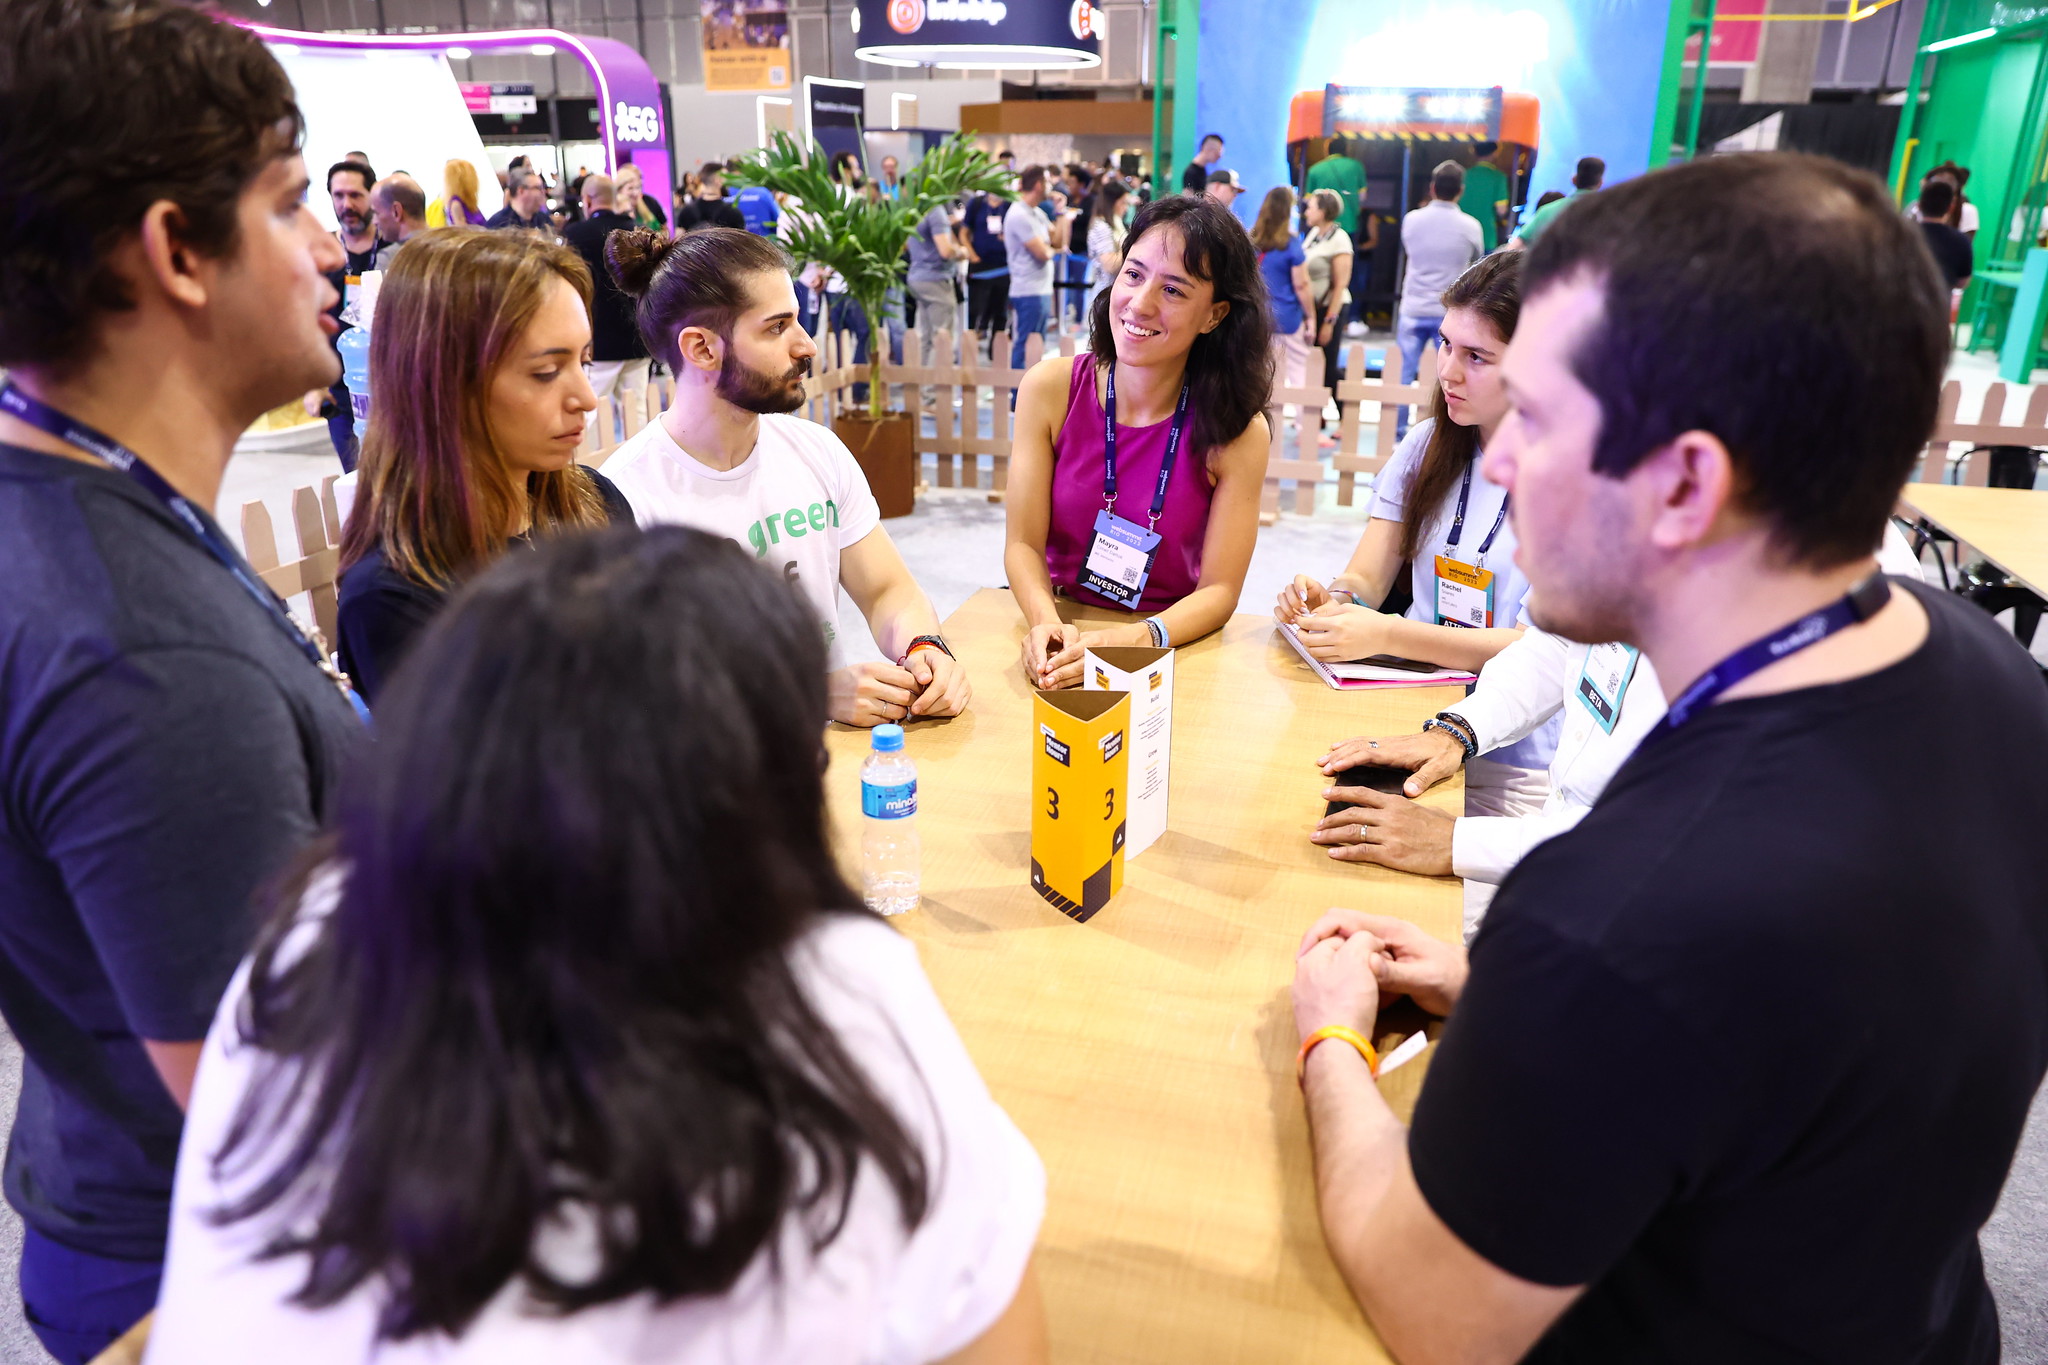 Mayra Cimet Dattoli, WE Ventures, and attendees at Mentor Hours during day two of Web Summit Rio 2023 at Riocentro in Rio de Janeiro, Brazil.